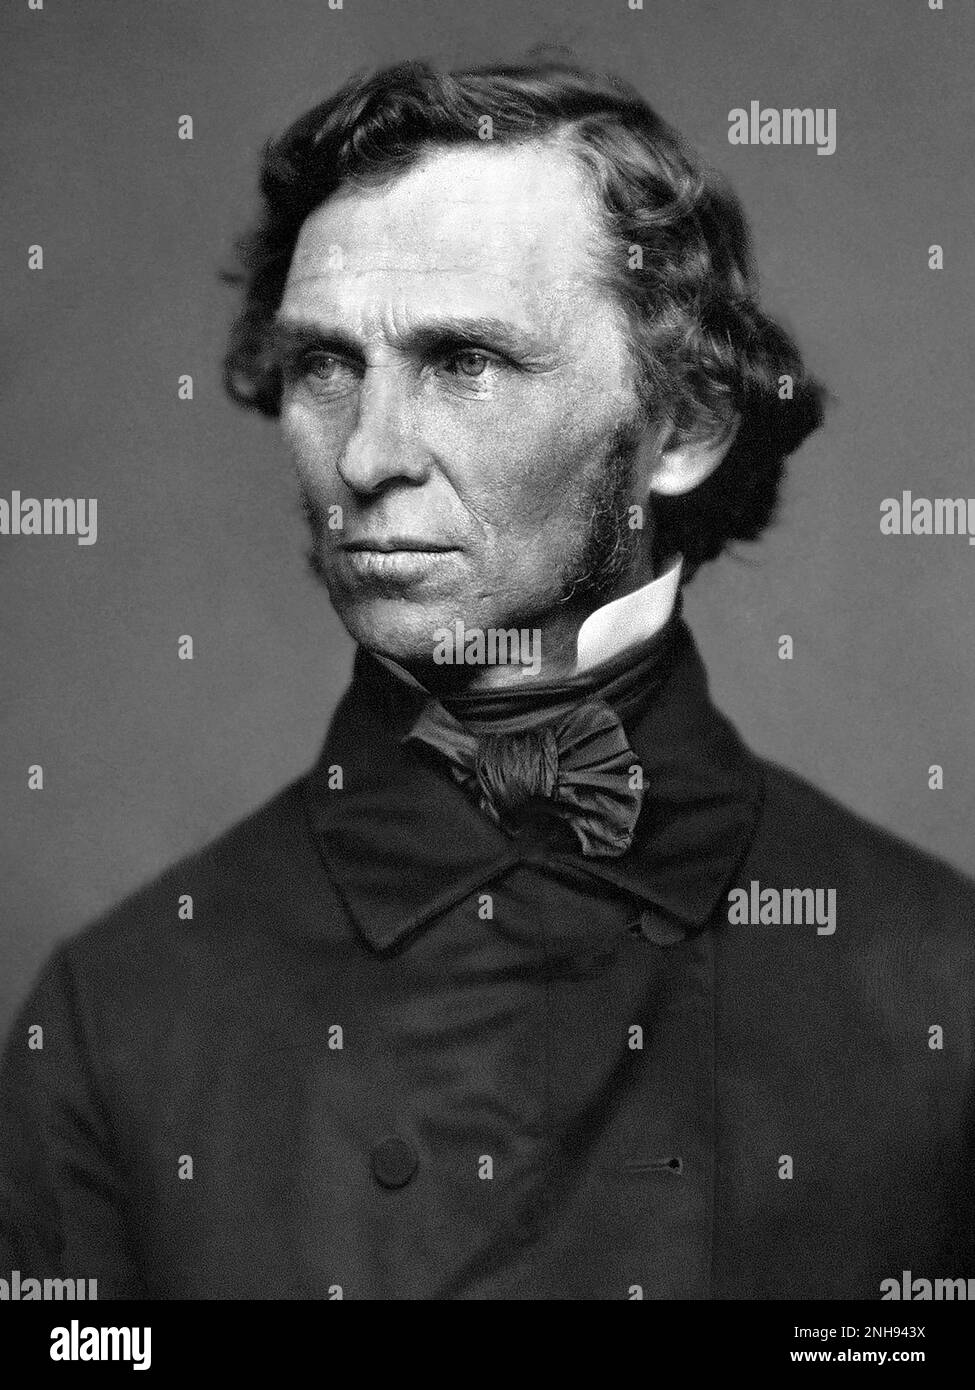 Neal Dow (1804-1897) was an American Prohibition advocate and politician nicknamed the 'Napoleon of Temperance' and the 'Father of Prohibition.' Photo, c. 1850s. Stock Photo